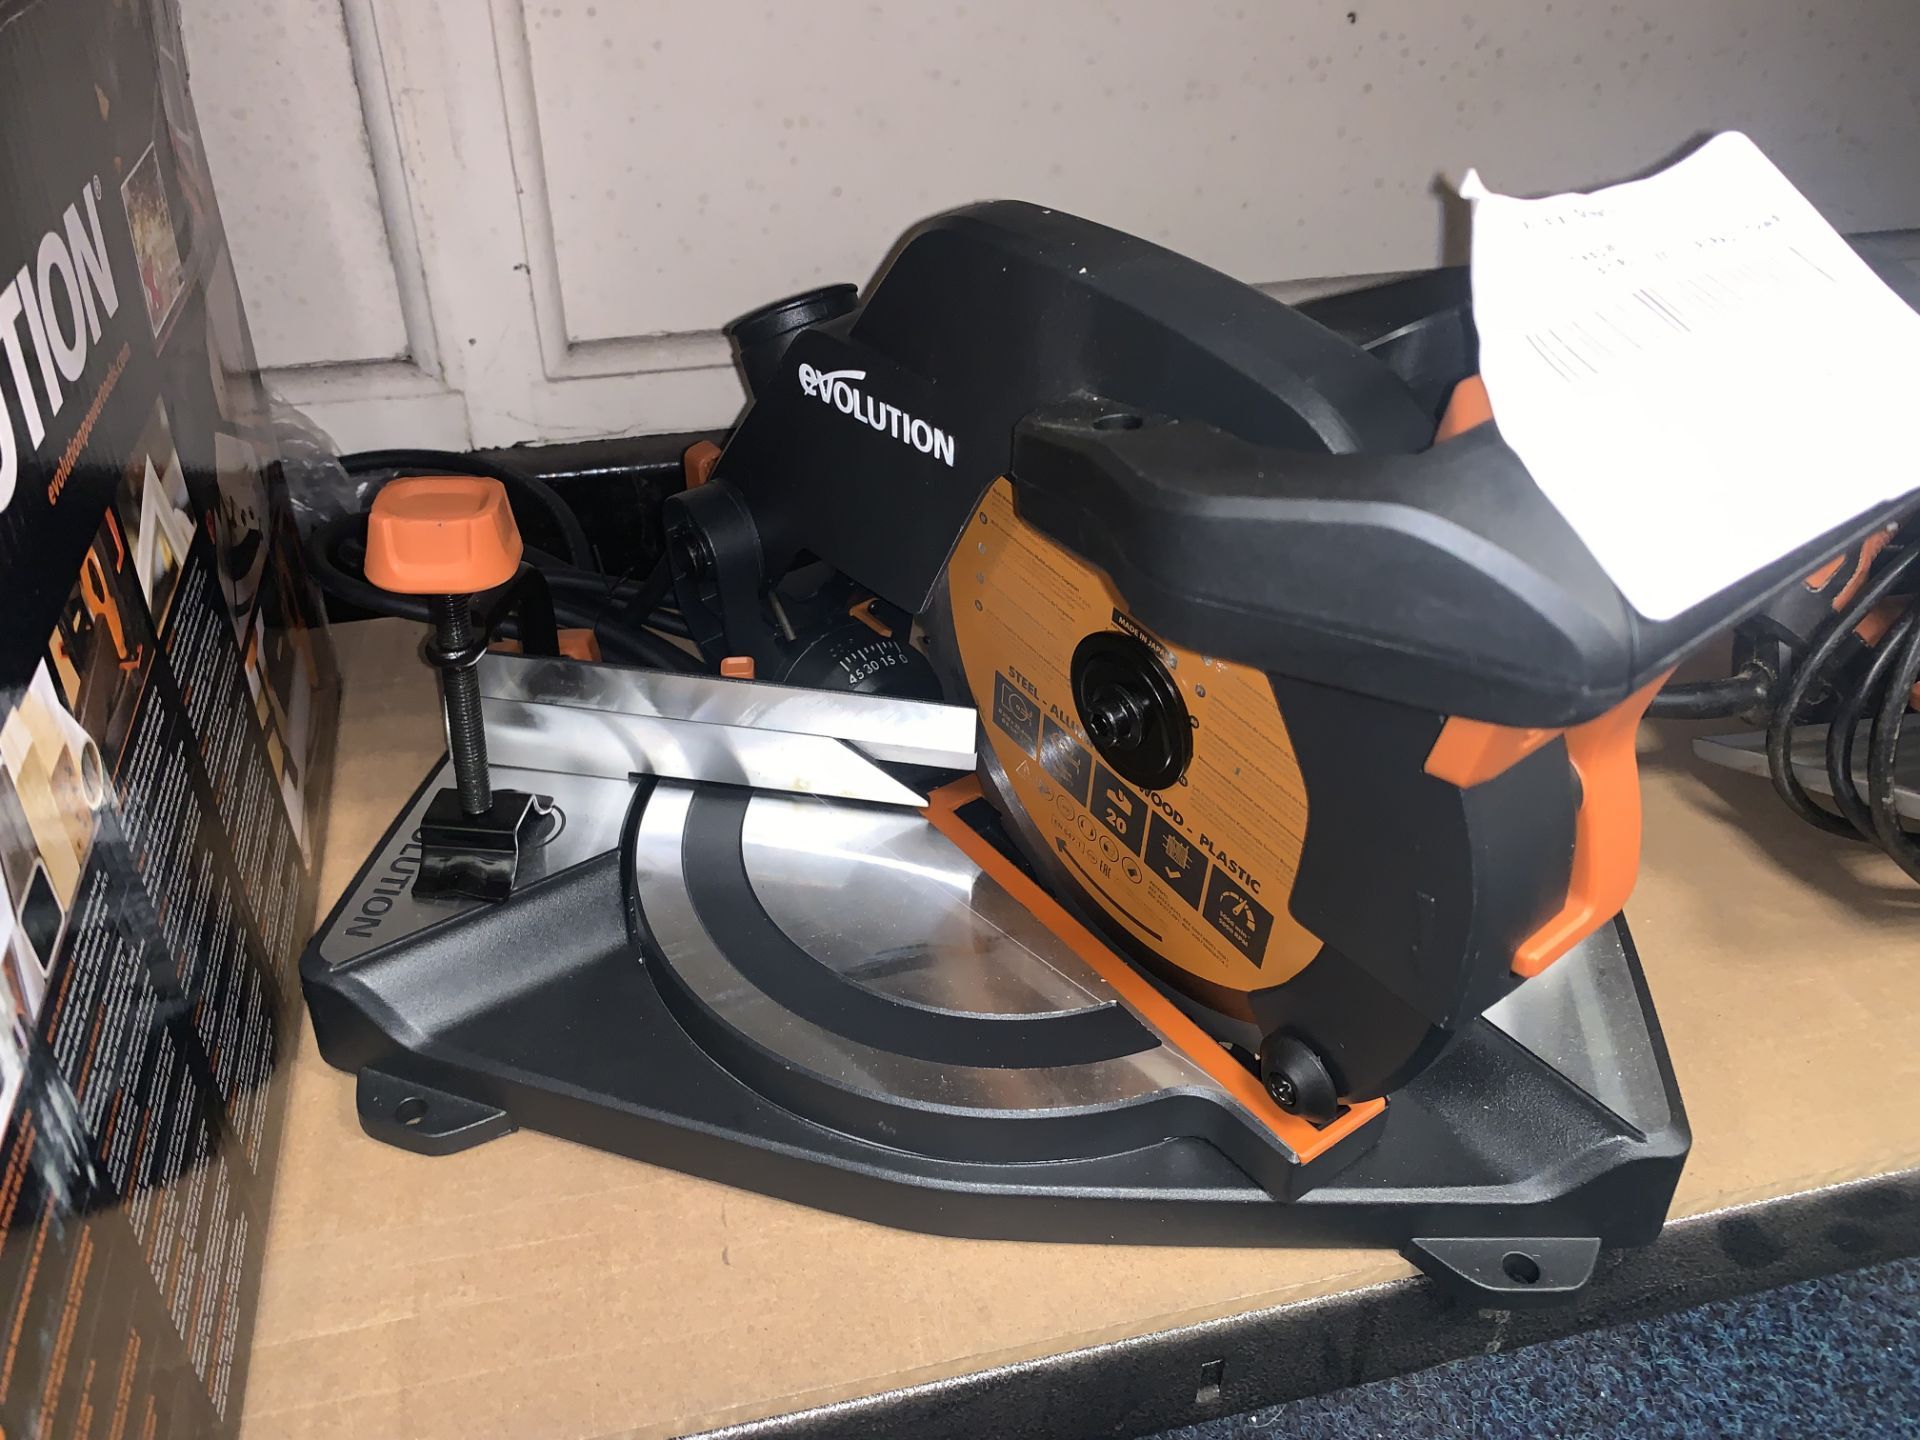 EVOLUTION R210CMS 210MM ELECTRIC SINGLE-BEVEL COMPOUND MITRE SAW 110V COMES WITH BOX (UNCHECKED) (